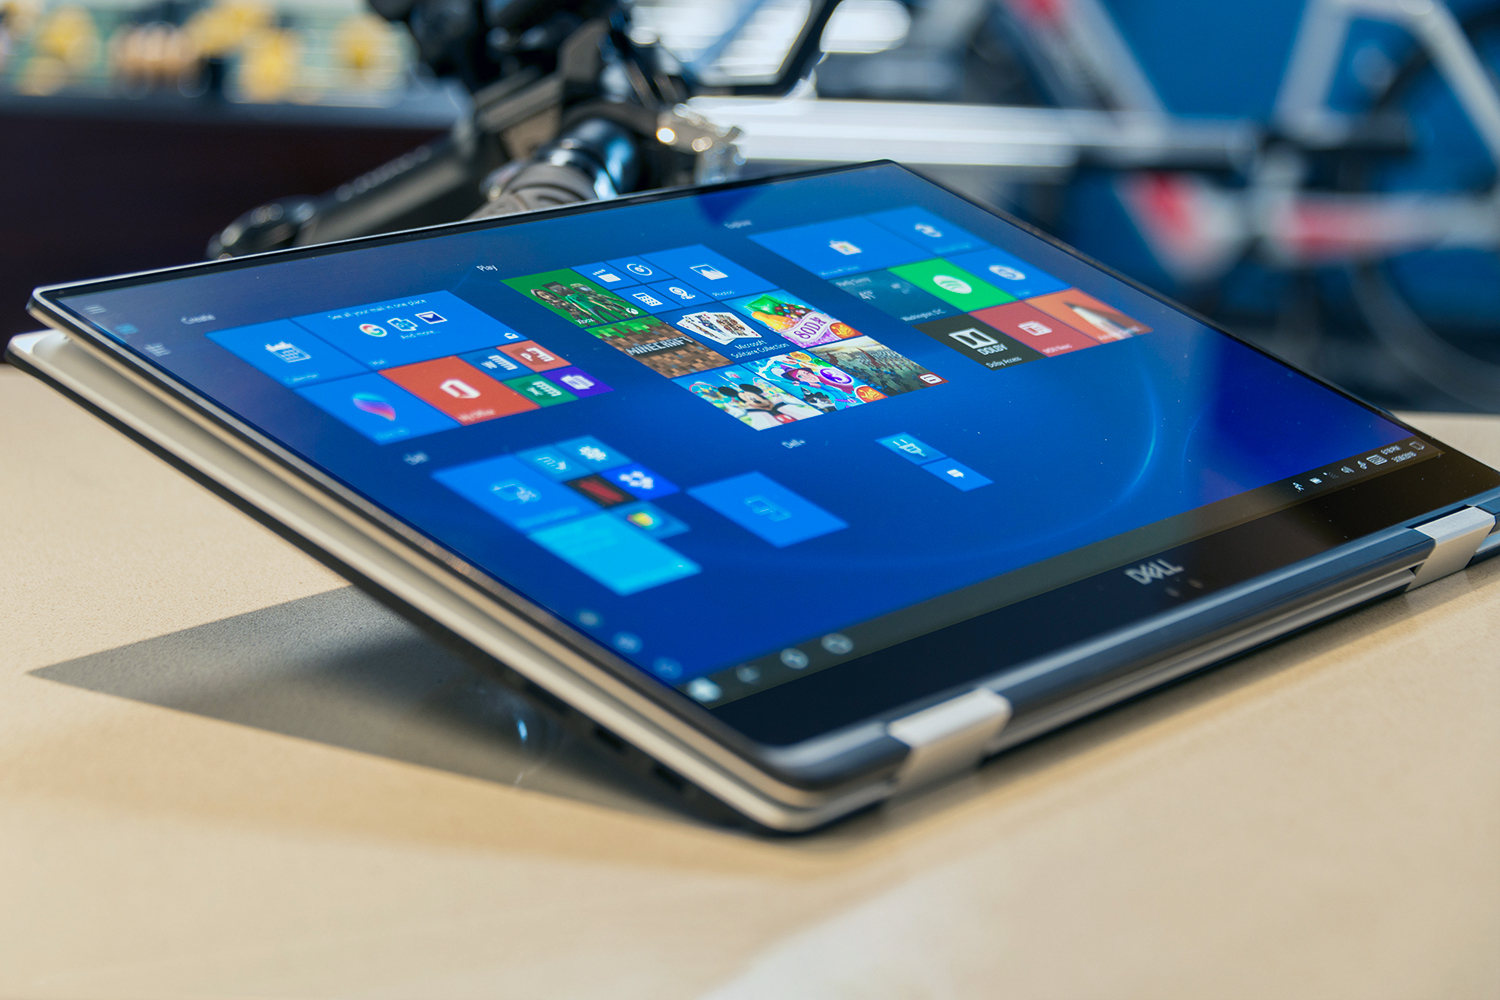 Dell XPS 15 2-in-1 Review: An Experiment Gone Right